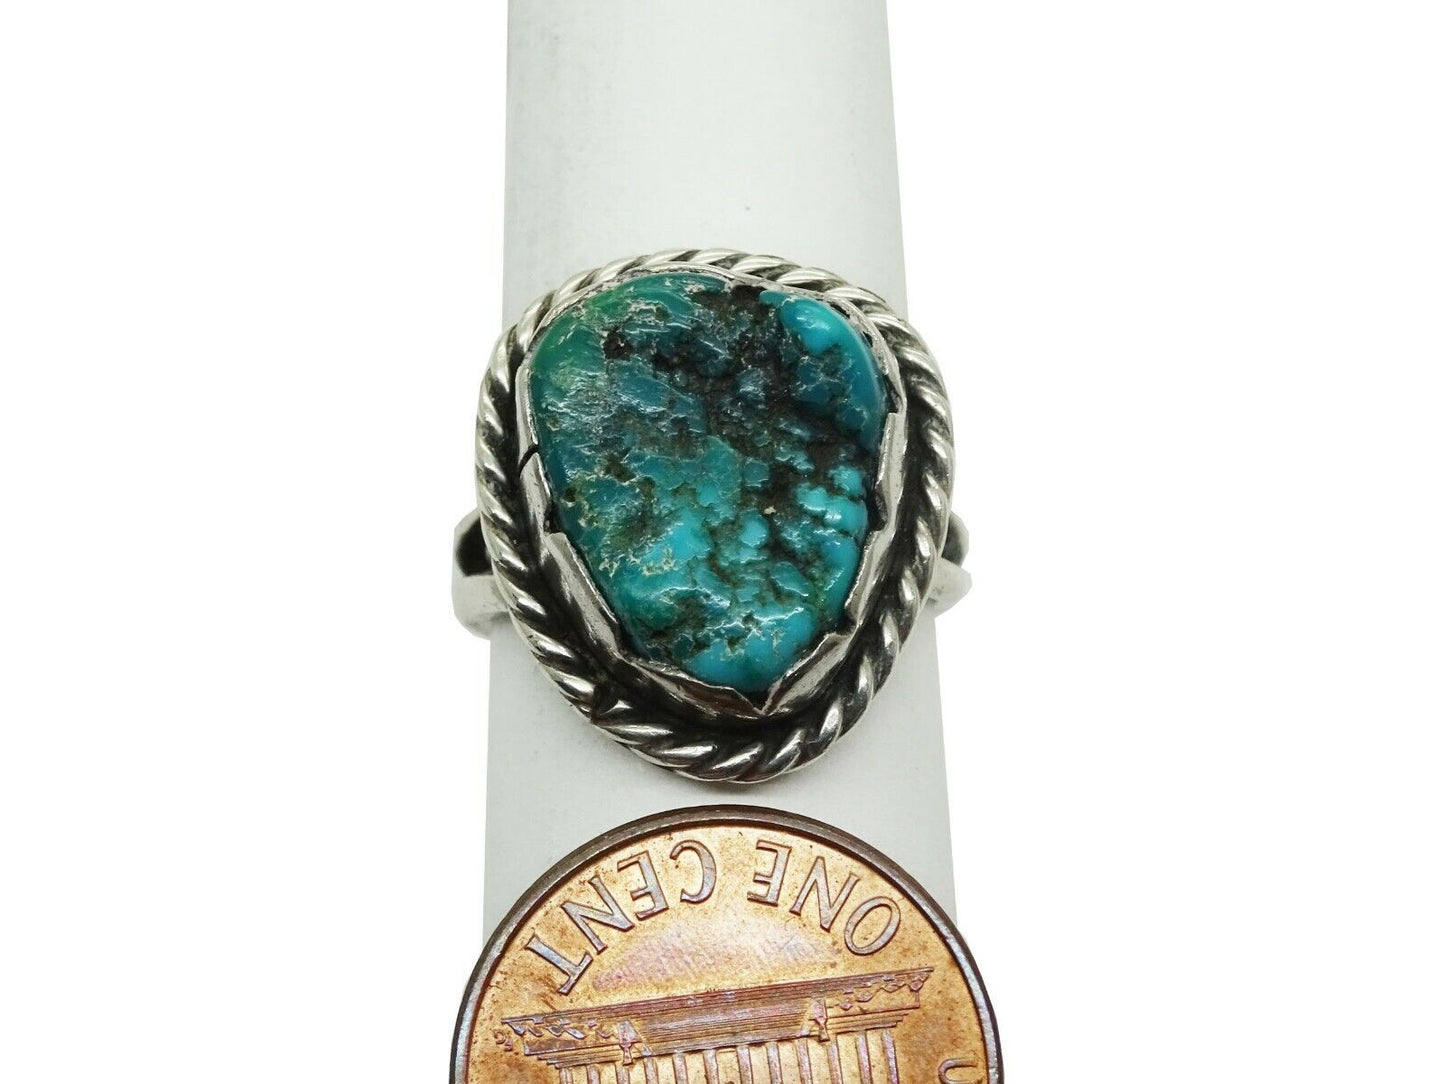 Southwestern Turquoise Nugget Split Shank Ring Sterling Silver Size 6.75